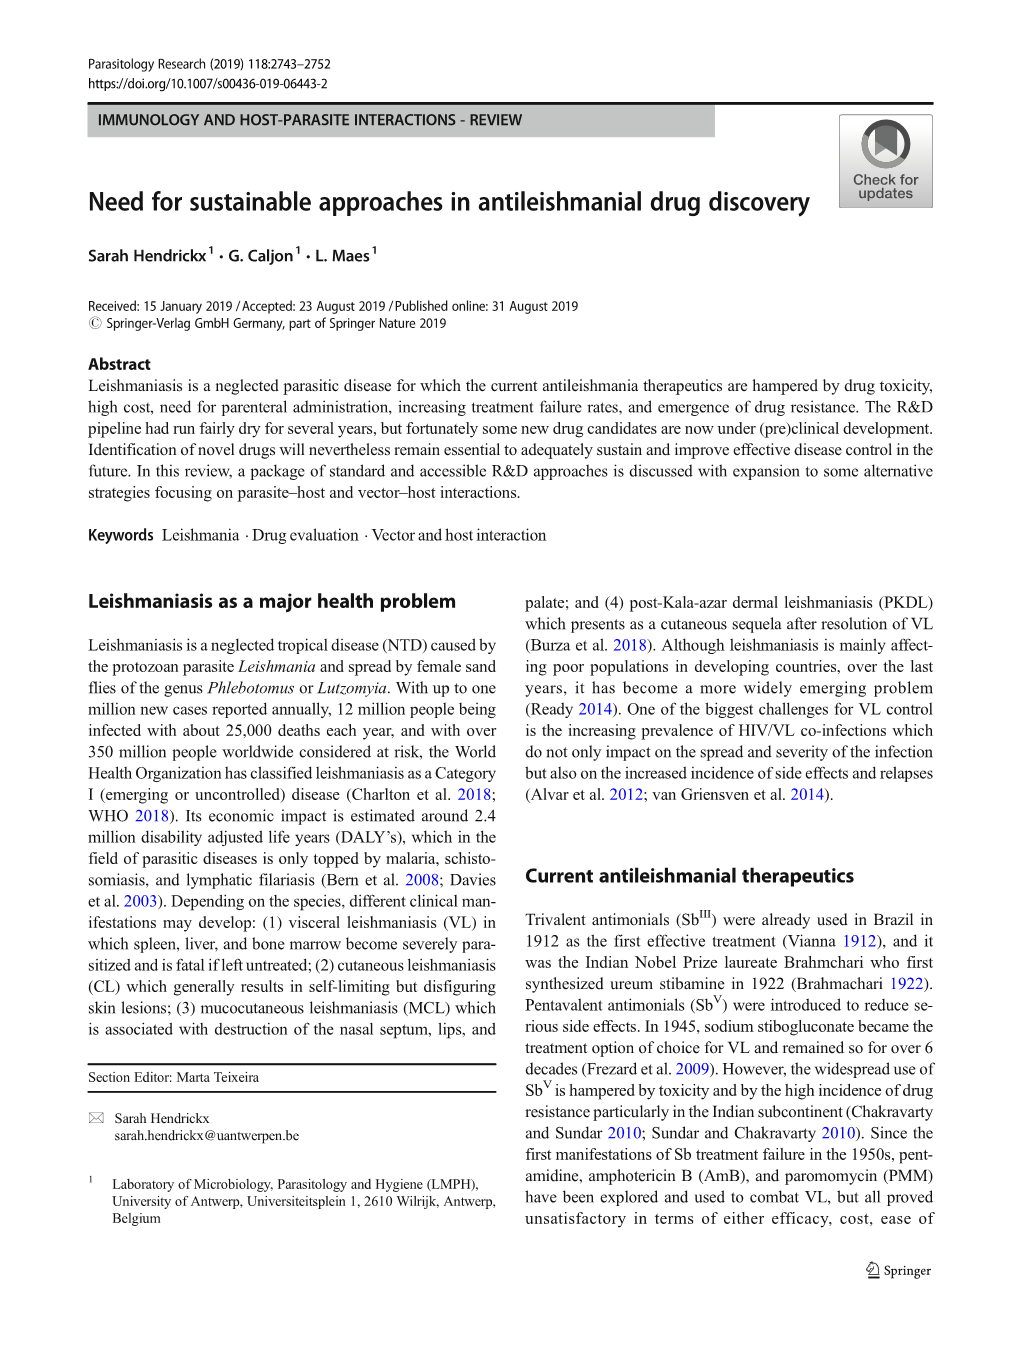 Need for Sustainable Approaches in Antileishmanial Drug Discovery